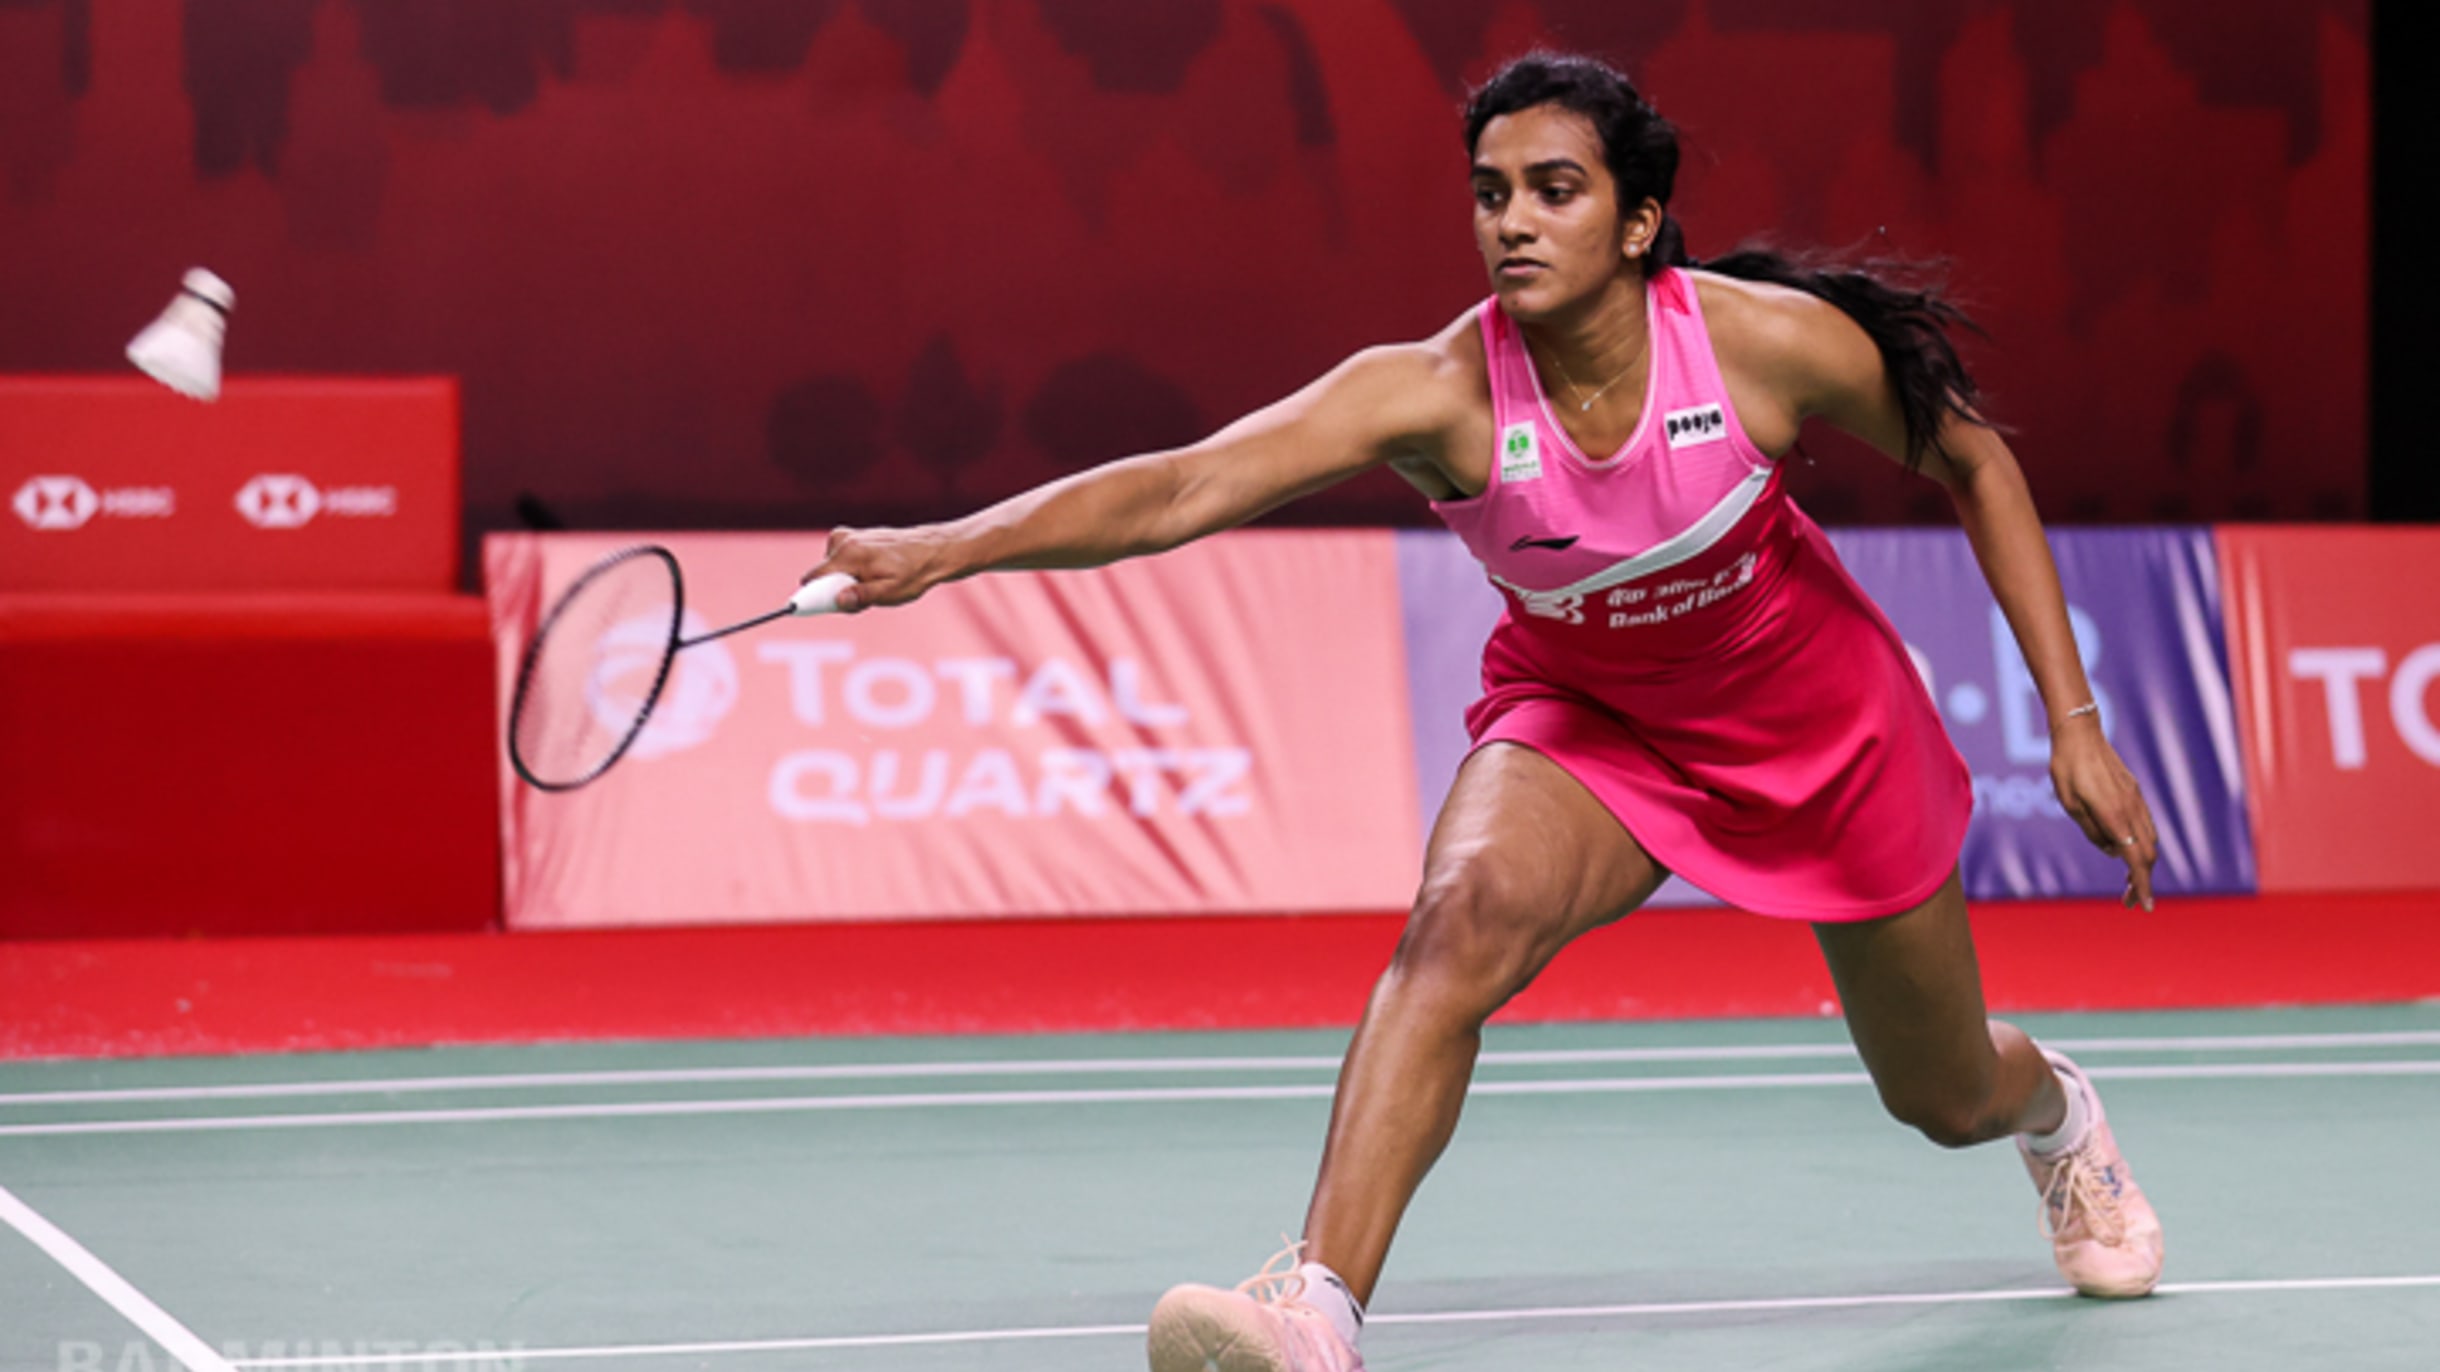 Thailand Open live PV Sindhu, Saina Nehwal in action, live match updates from the first badminton event of 2021